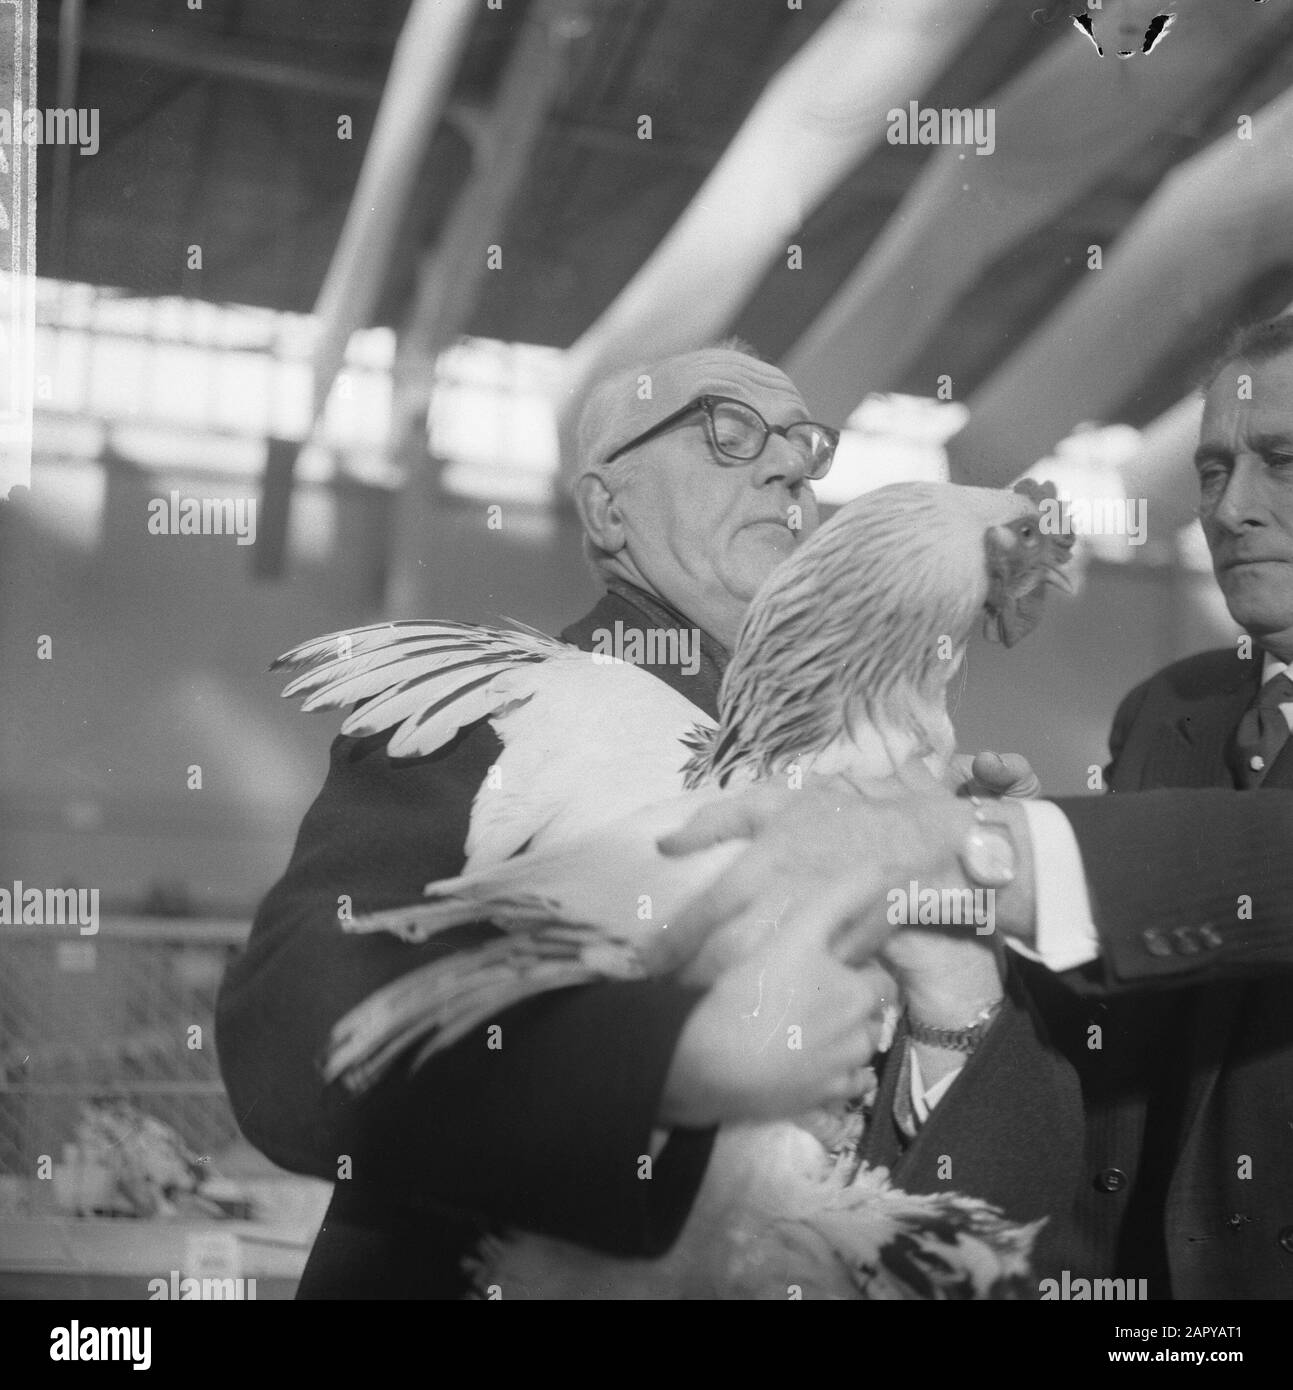 Exhibition Avicultura opened in Houtrusthallen in The Hague, mayor Kolfschoten with one of the sent chickens Date: 17 january 1964 Location: The Hague, Zuid-Holland Keywords: KIPPEN, mayors, exhibitions Personal name: Avicultura, Kolfschoten, Hans Institution name: Wootrusthallen Stock Photo